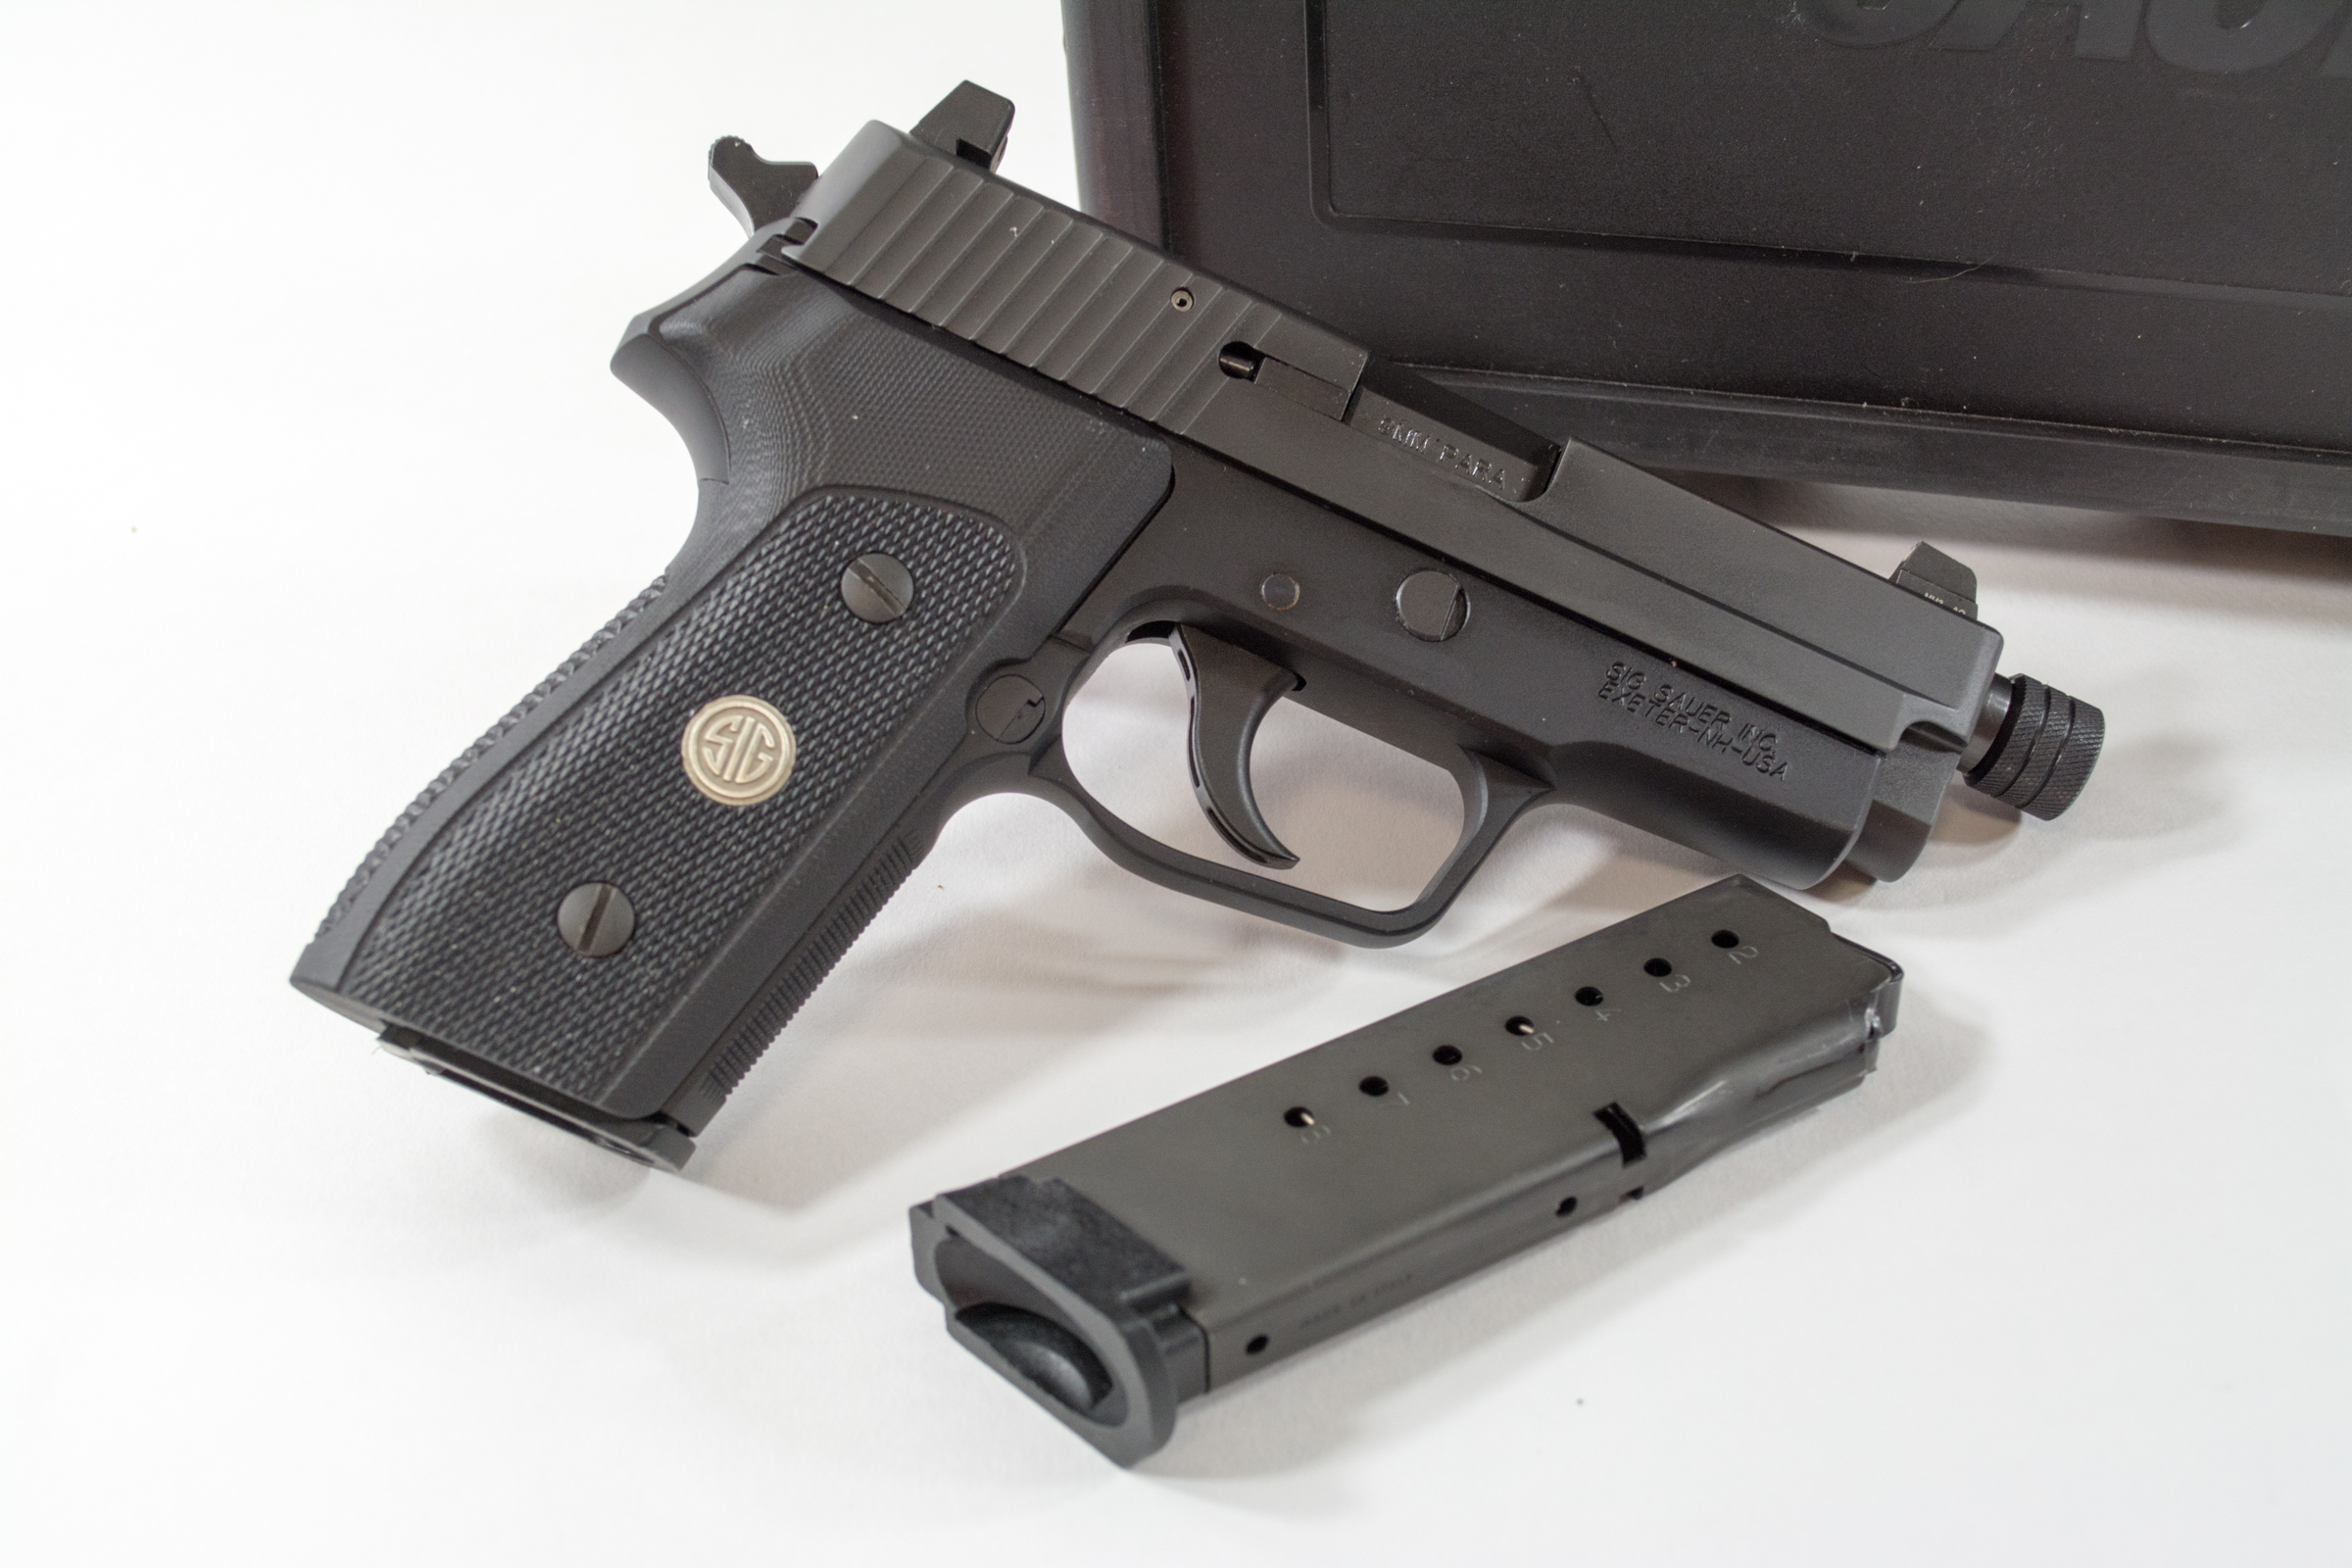 The Sig Sauer P225 A1 comes with two 8-round magazines. It weighs 2 pounds fully loaded.